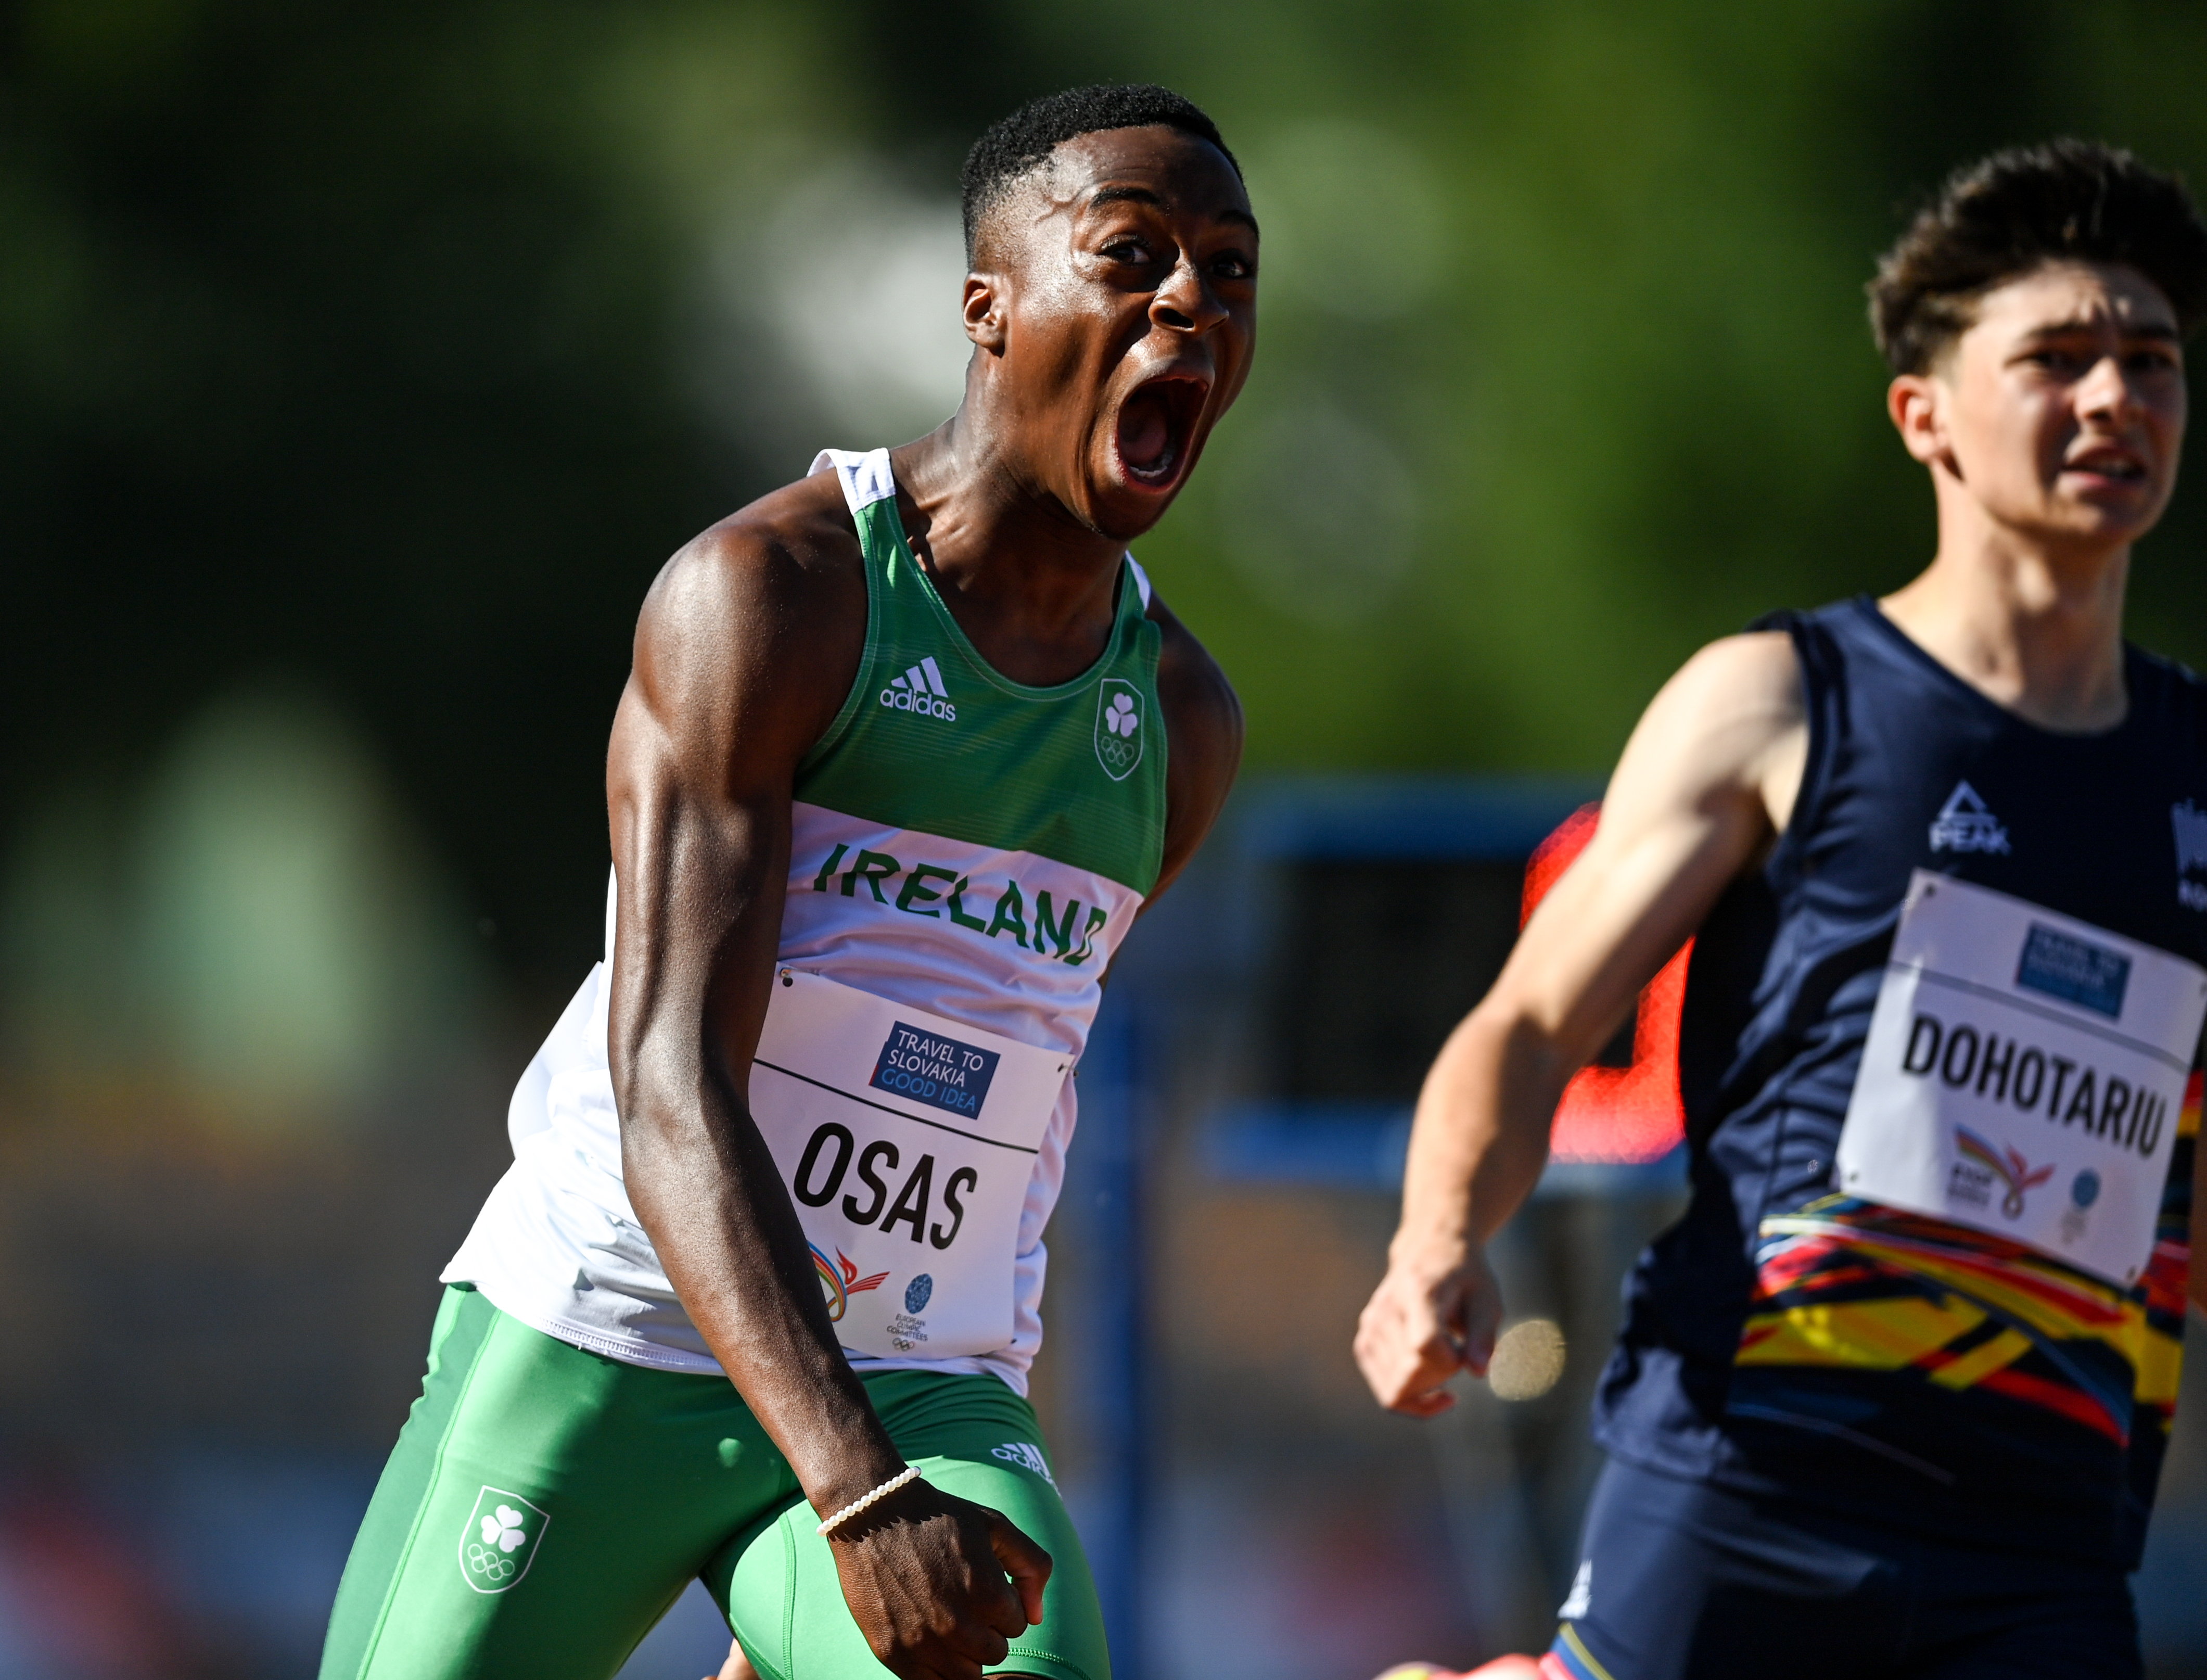 PBS AND TOP CLASS PERFORMANCES ON DAY 1 OF EYOF